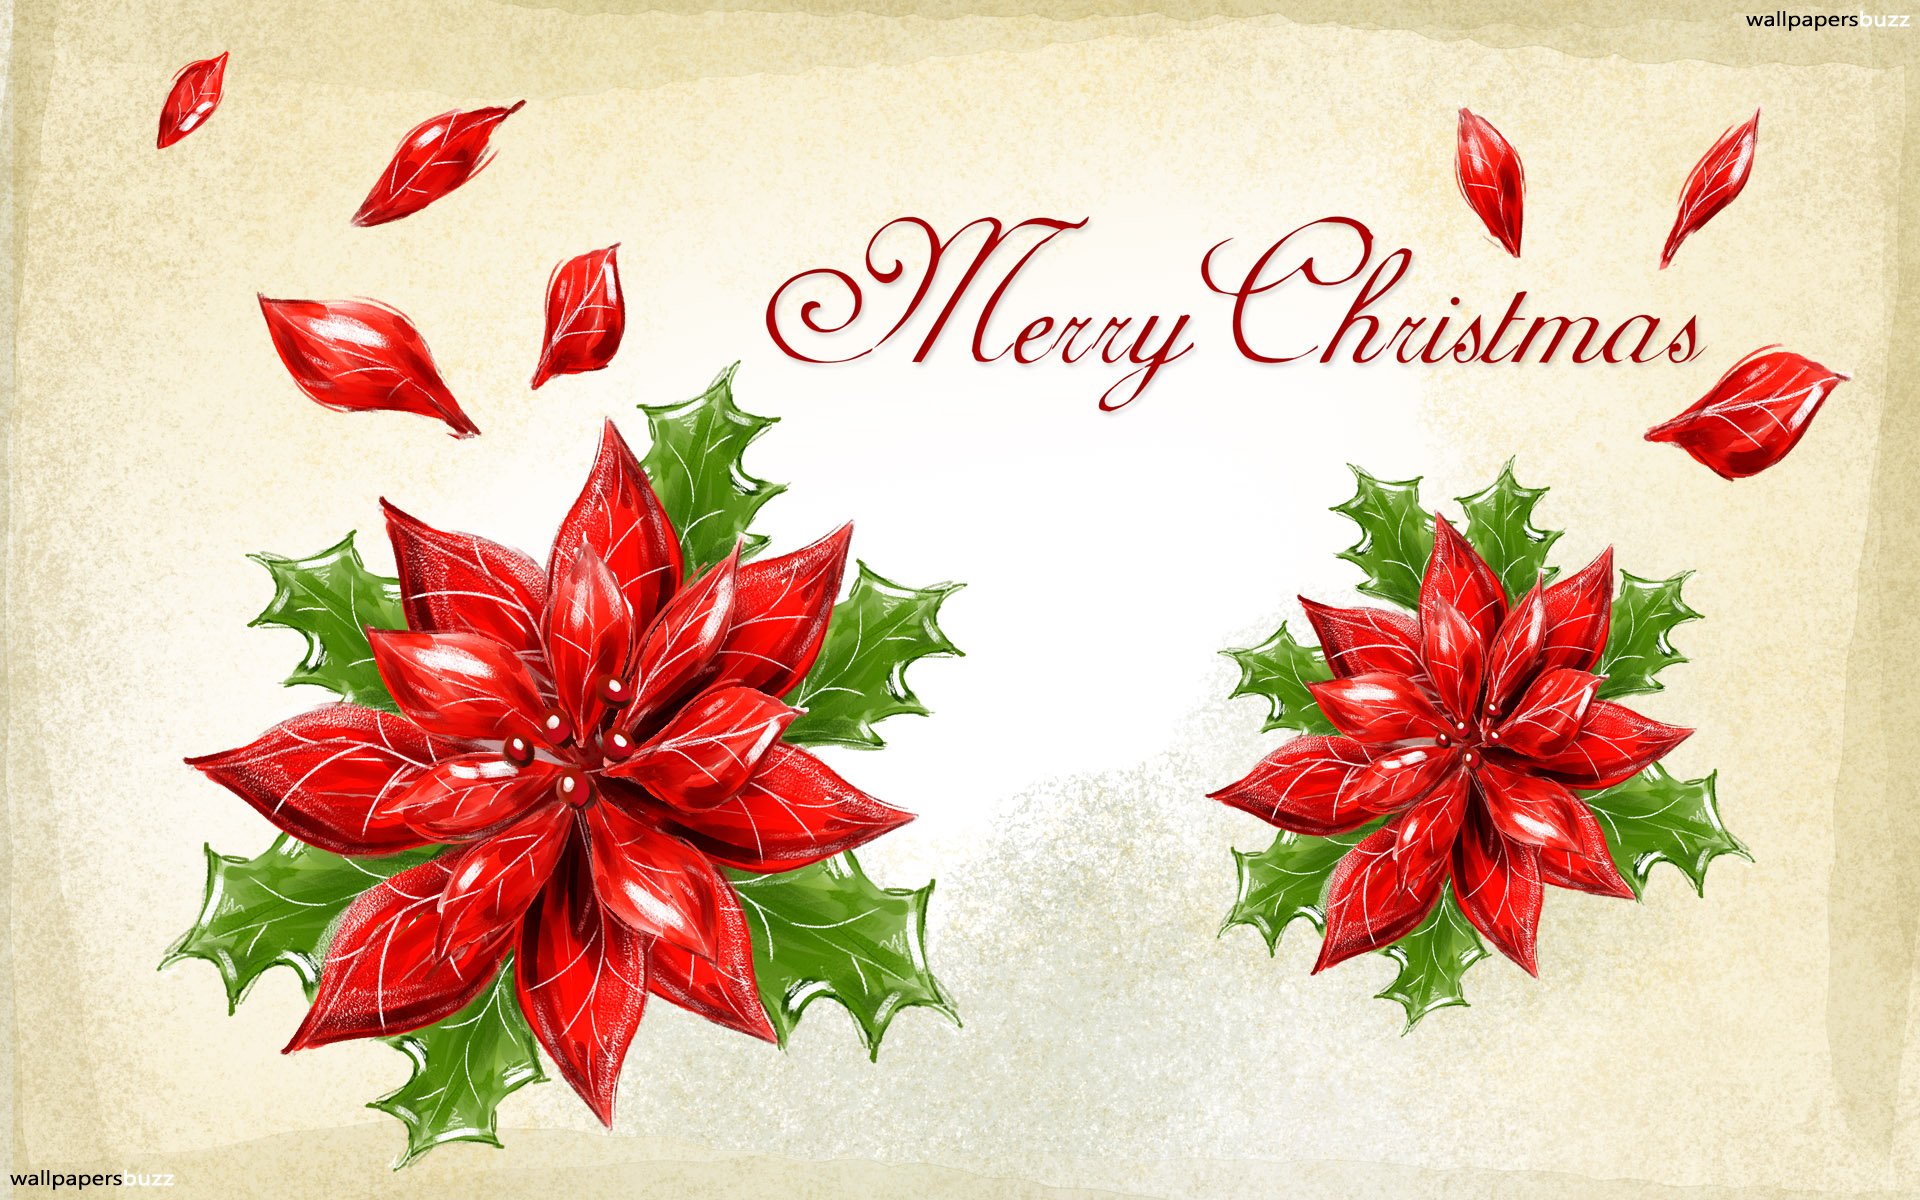 Merry Christmas Poinsettia Wallpapers Free - HD Wallpaper 